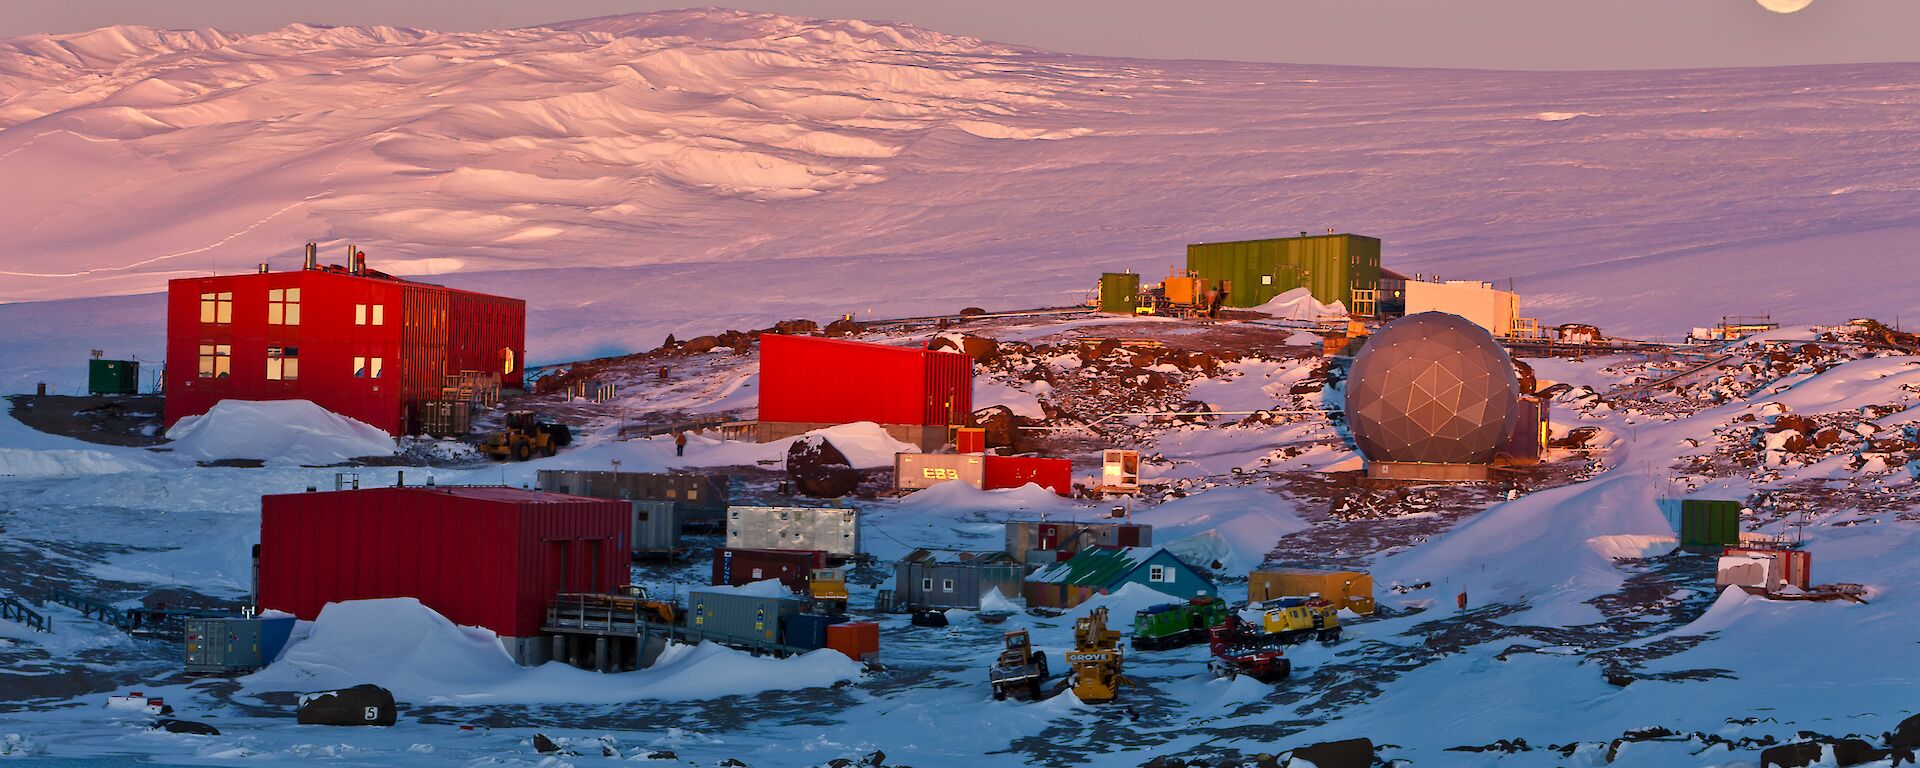 A view of Mawson Station with the Moon visible above the distant horizon